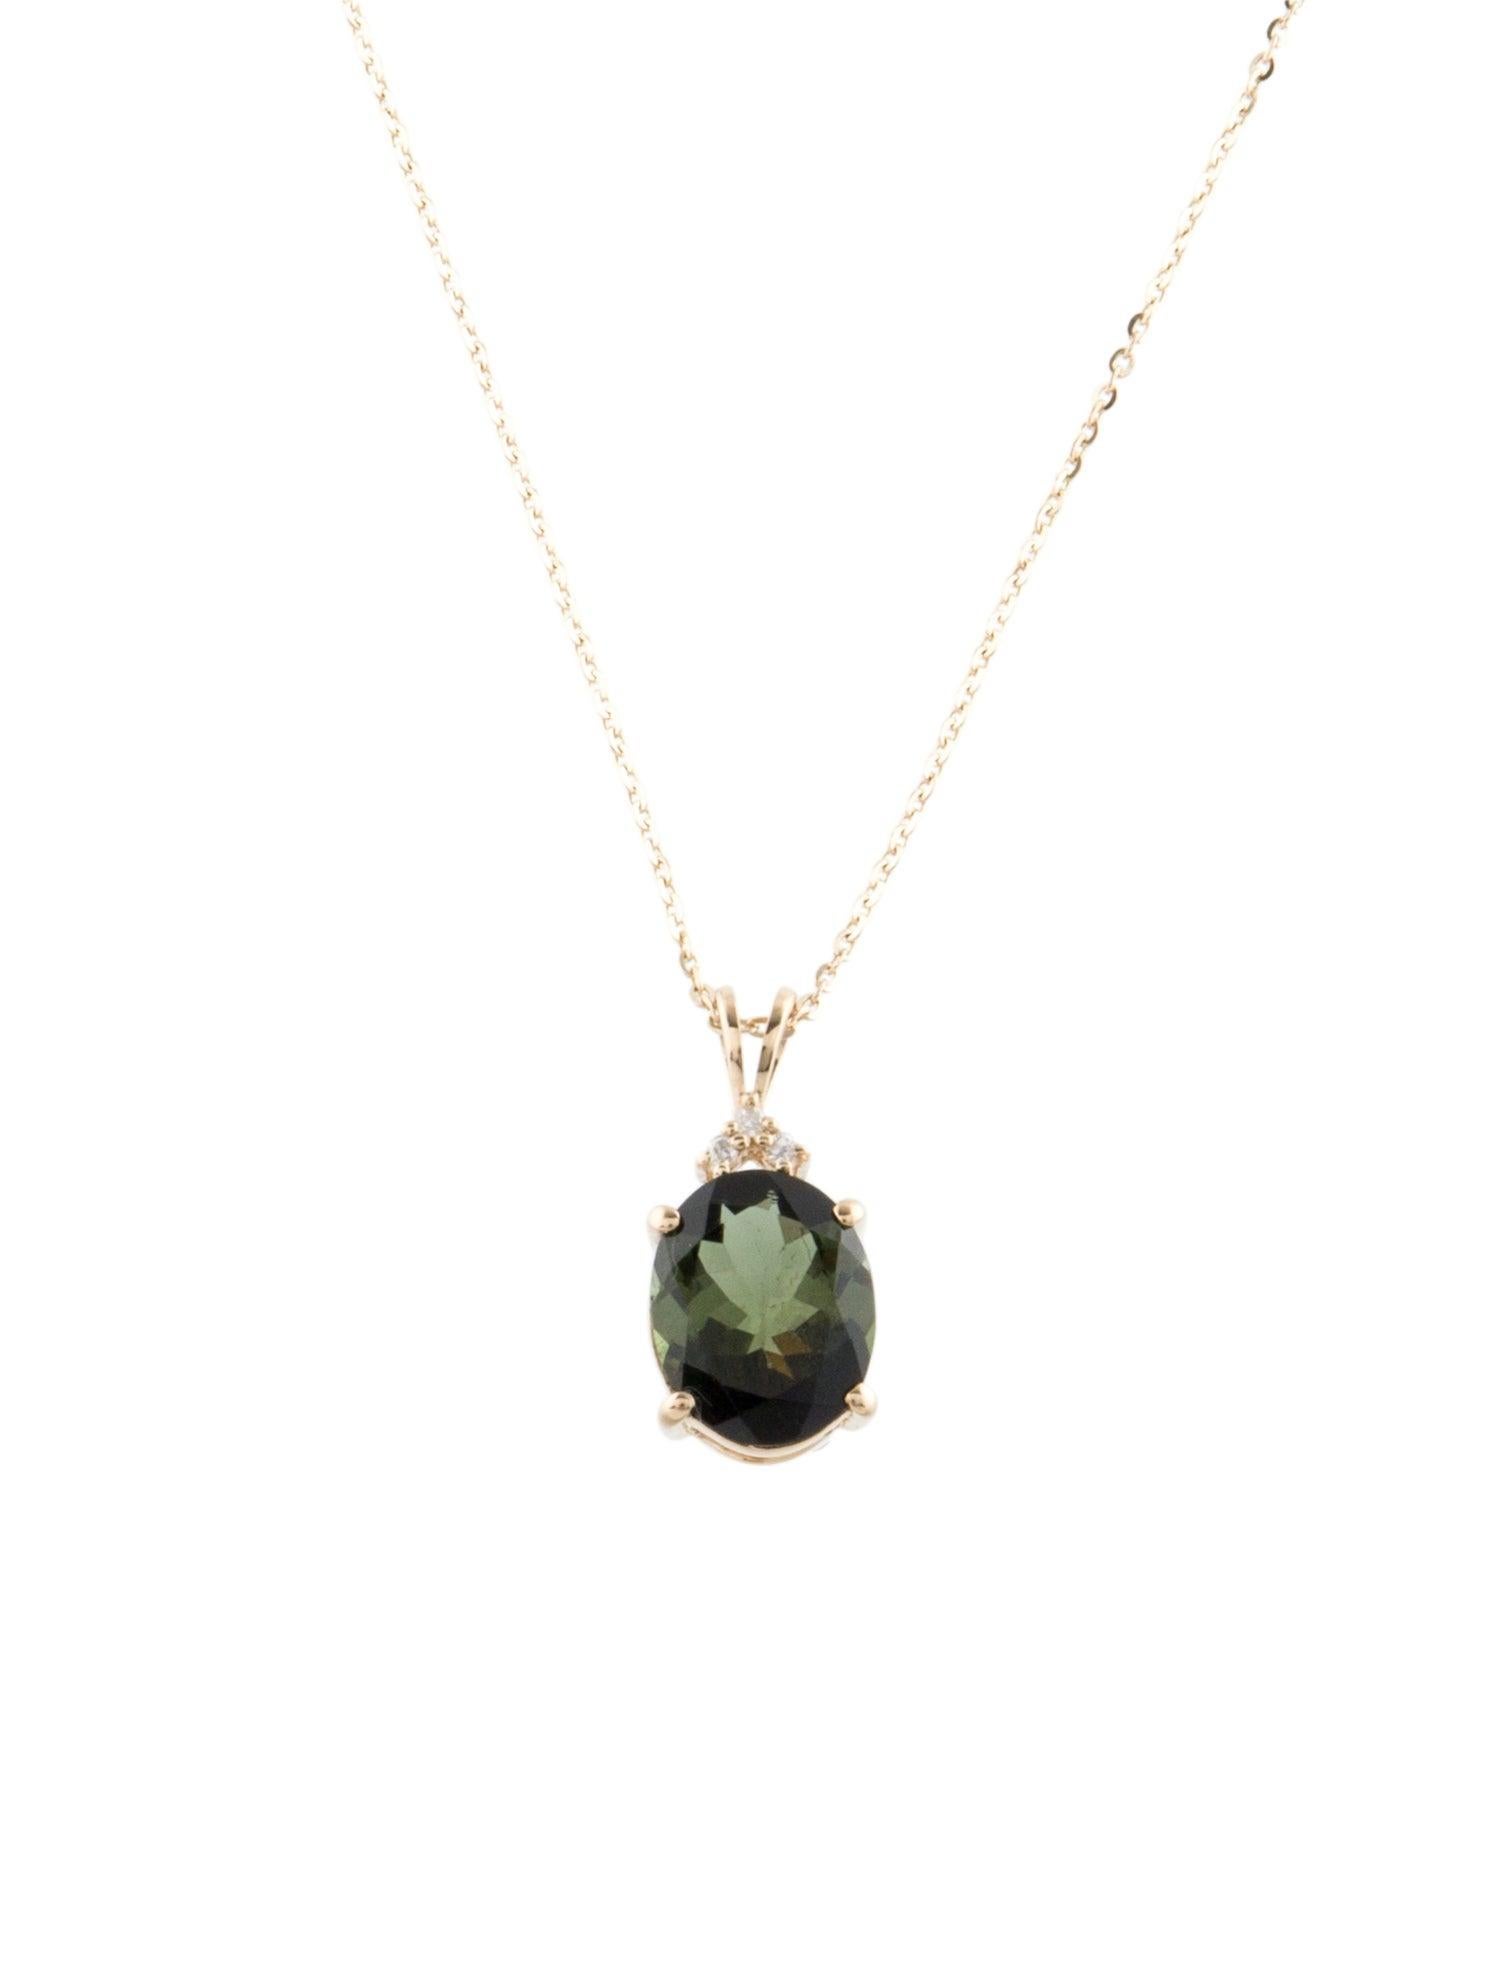 Stunning 14K Tourmaline & Diamond Pendant Necklace  Gemstone Sparkle Jewelry In New Condition For Sale In Holtsville, NY